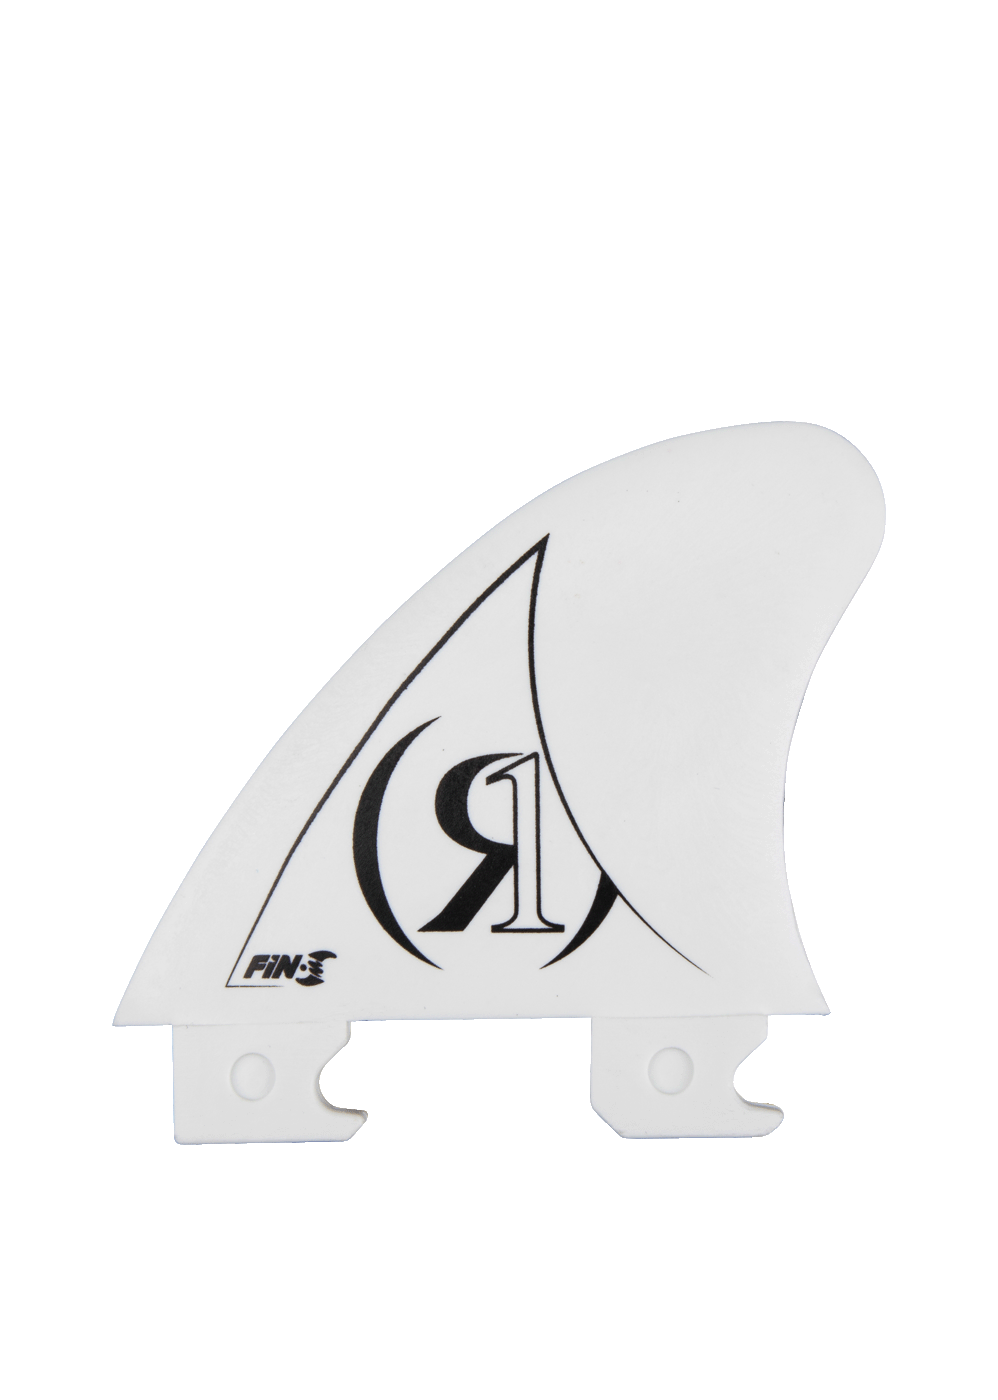 Ronix Fins | Fin-S Tool-less Center Surf Fin | Ronix Wakeboards